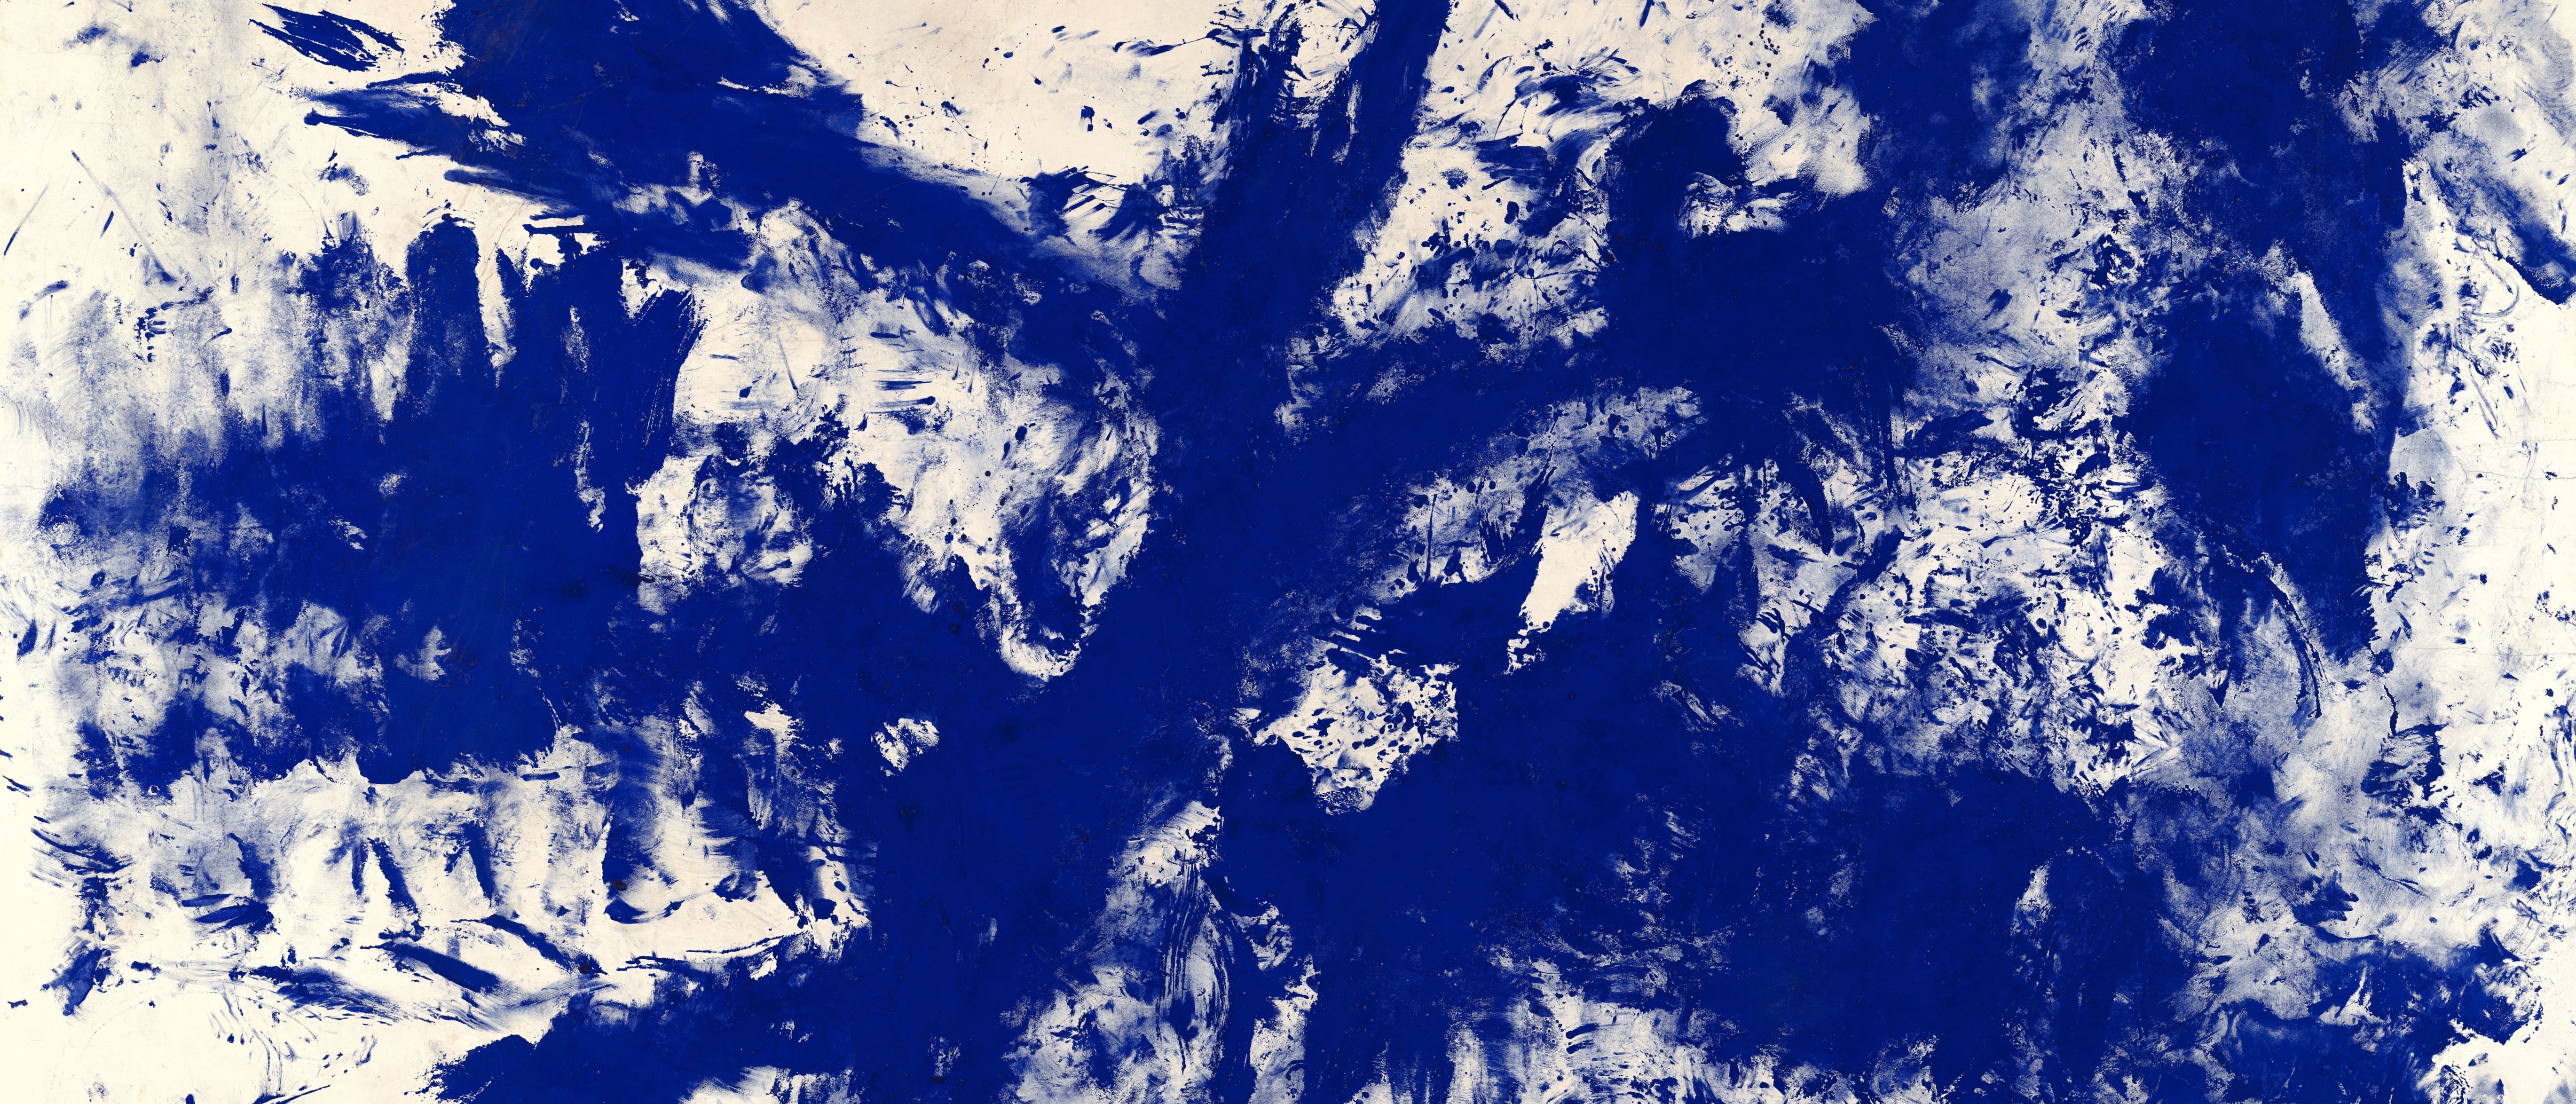 General 5479x2348 ultrawide painting abstract Rorschach test artwork